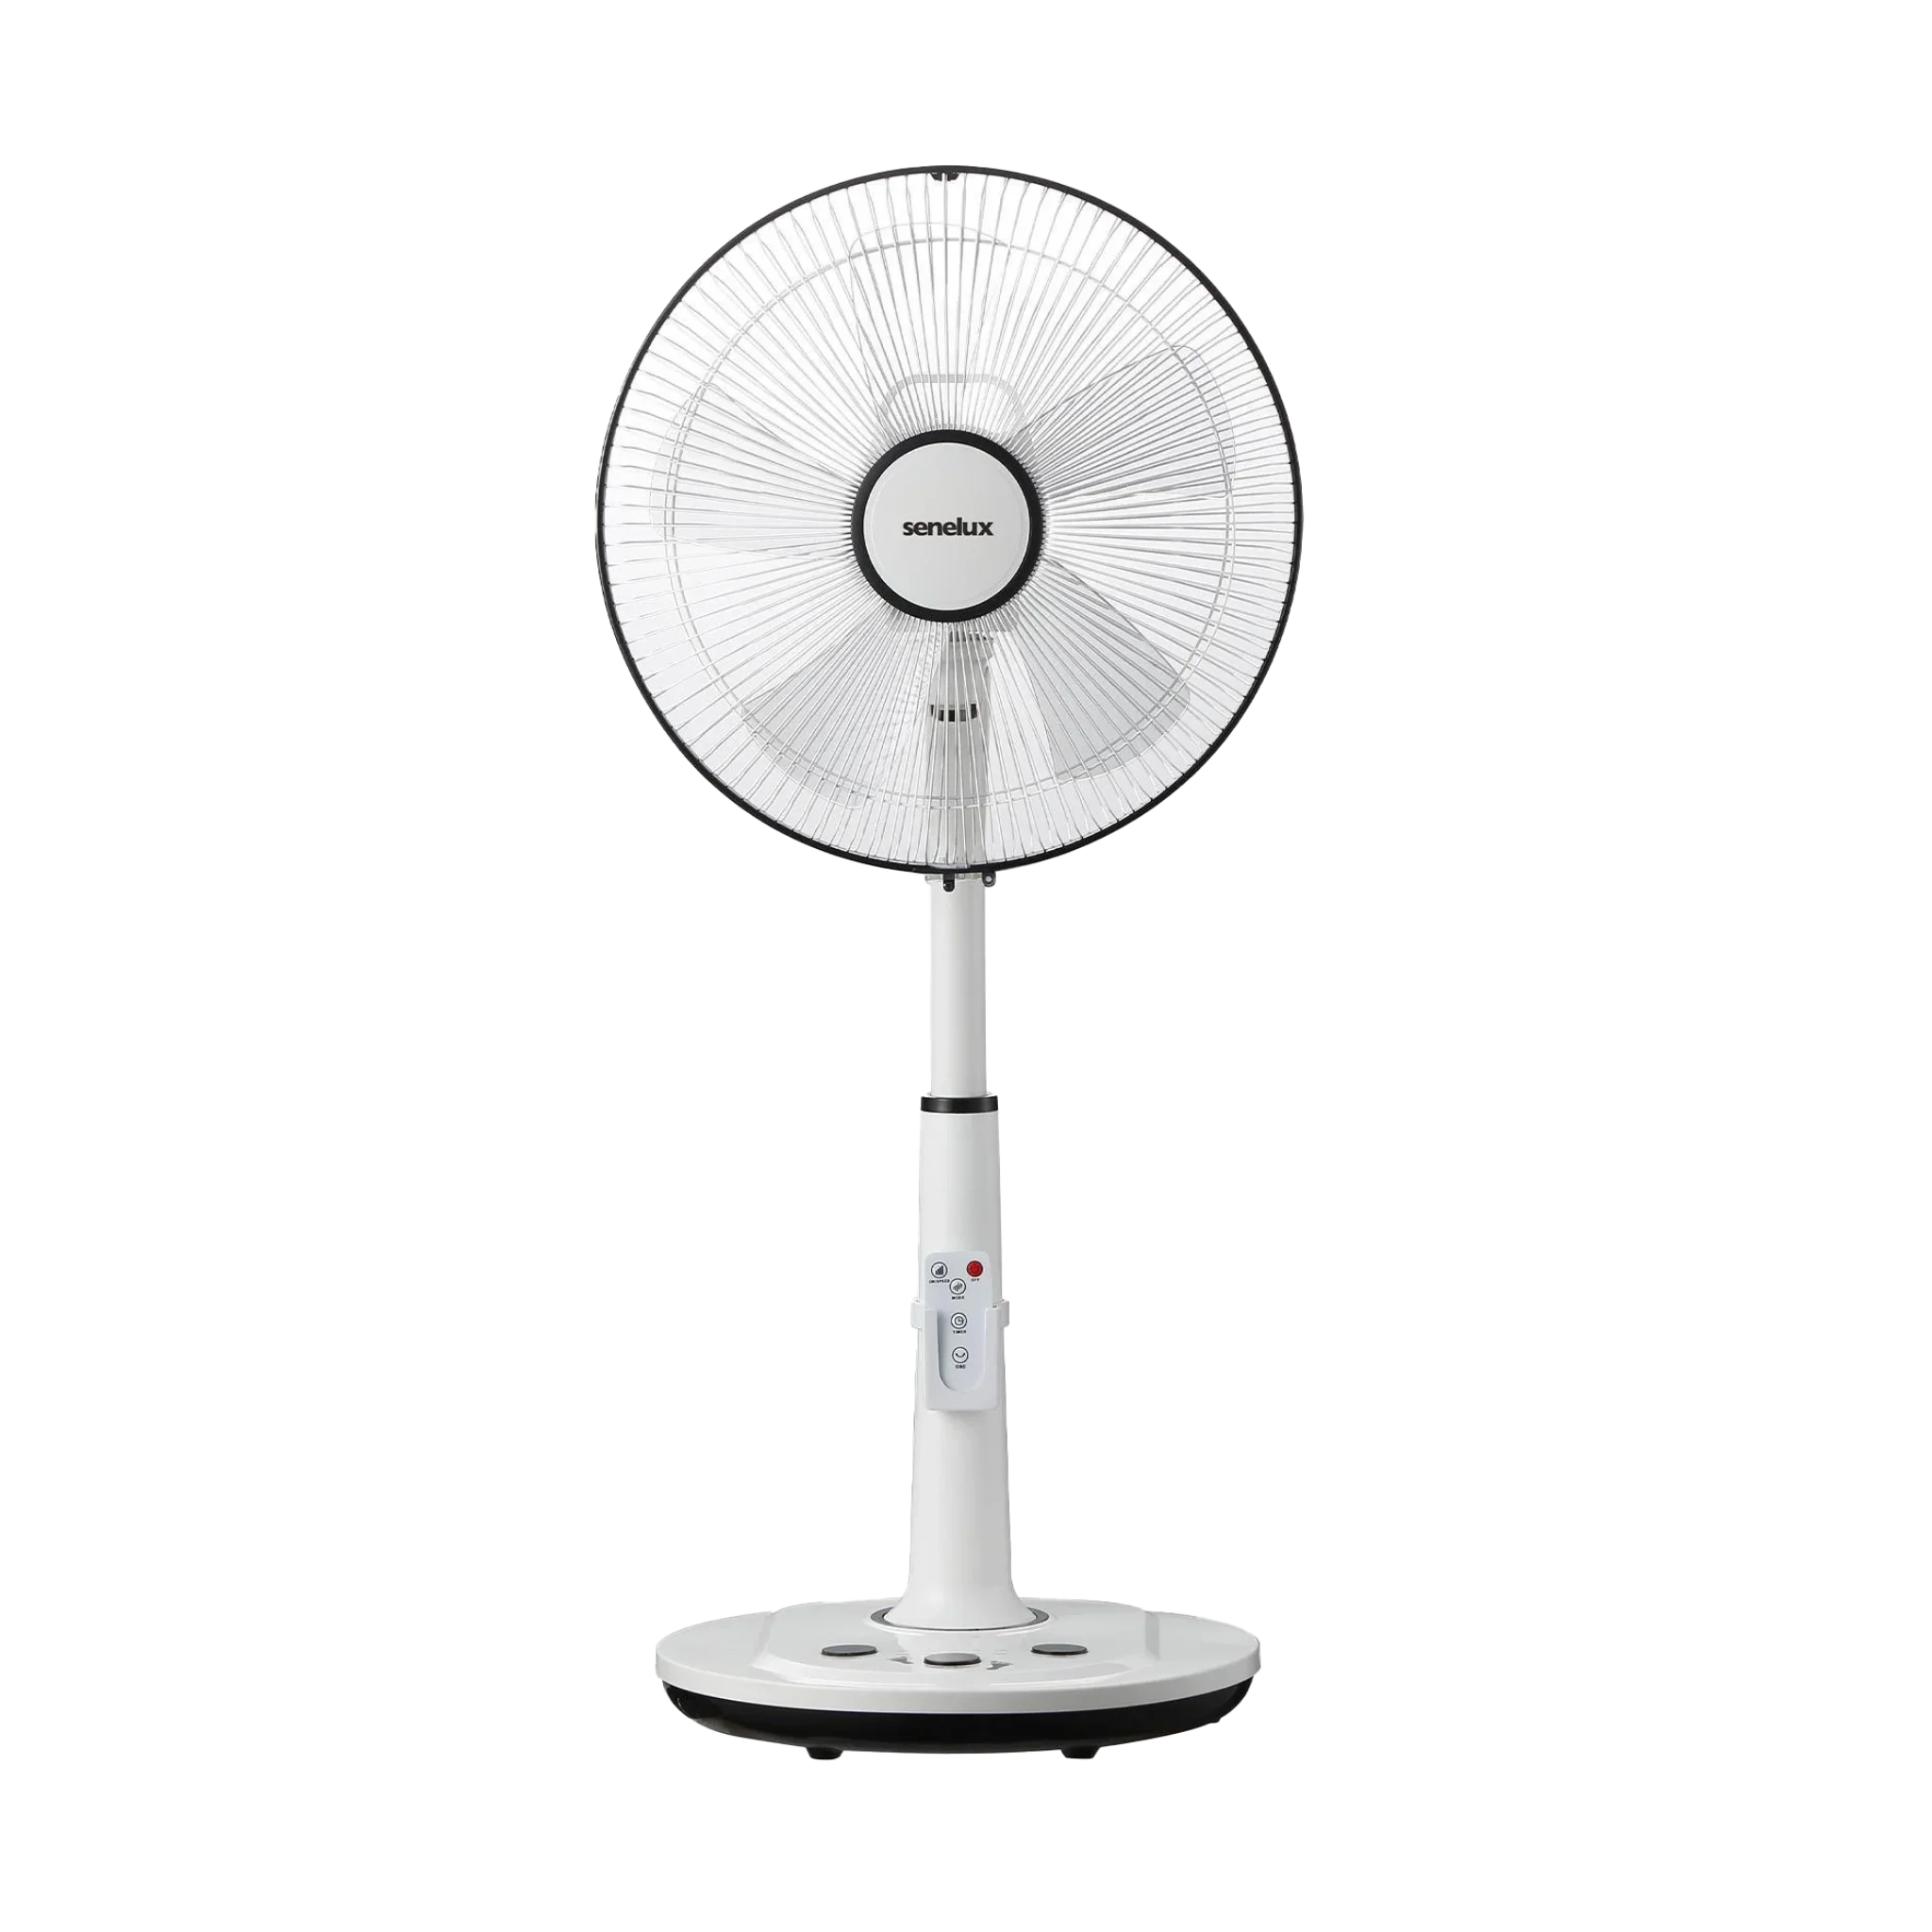 A picture of a white, tall Senelux 14 inch pedestal fan with telescopic neck and adjustable fan head for air flow.